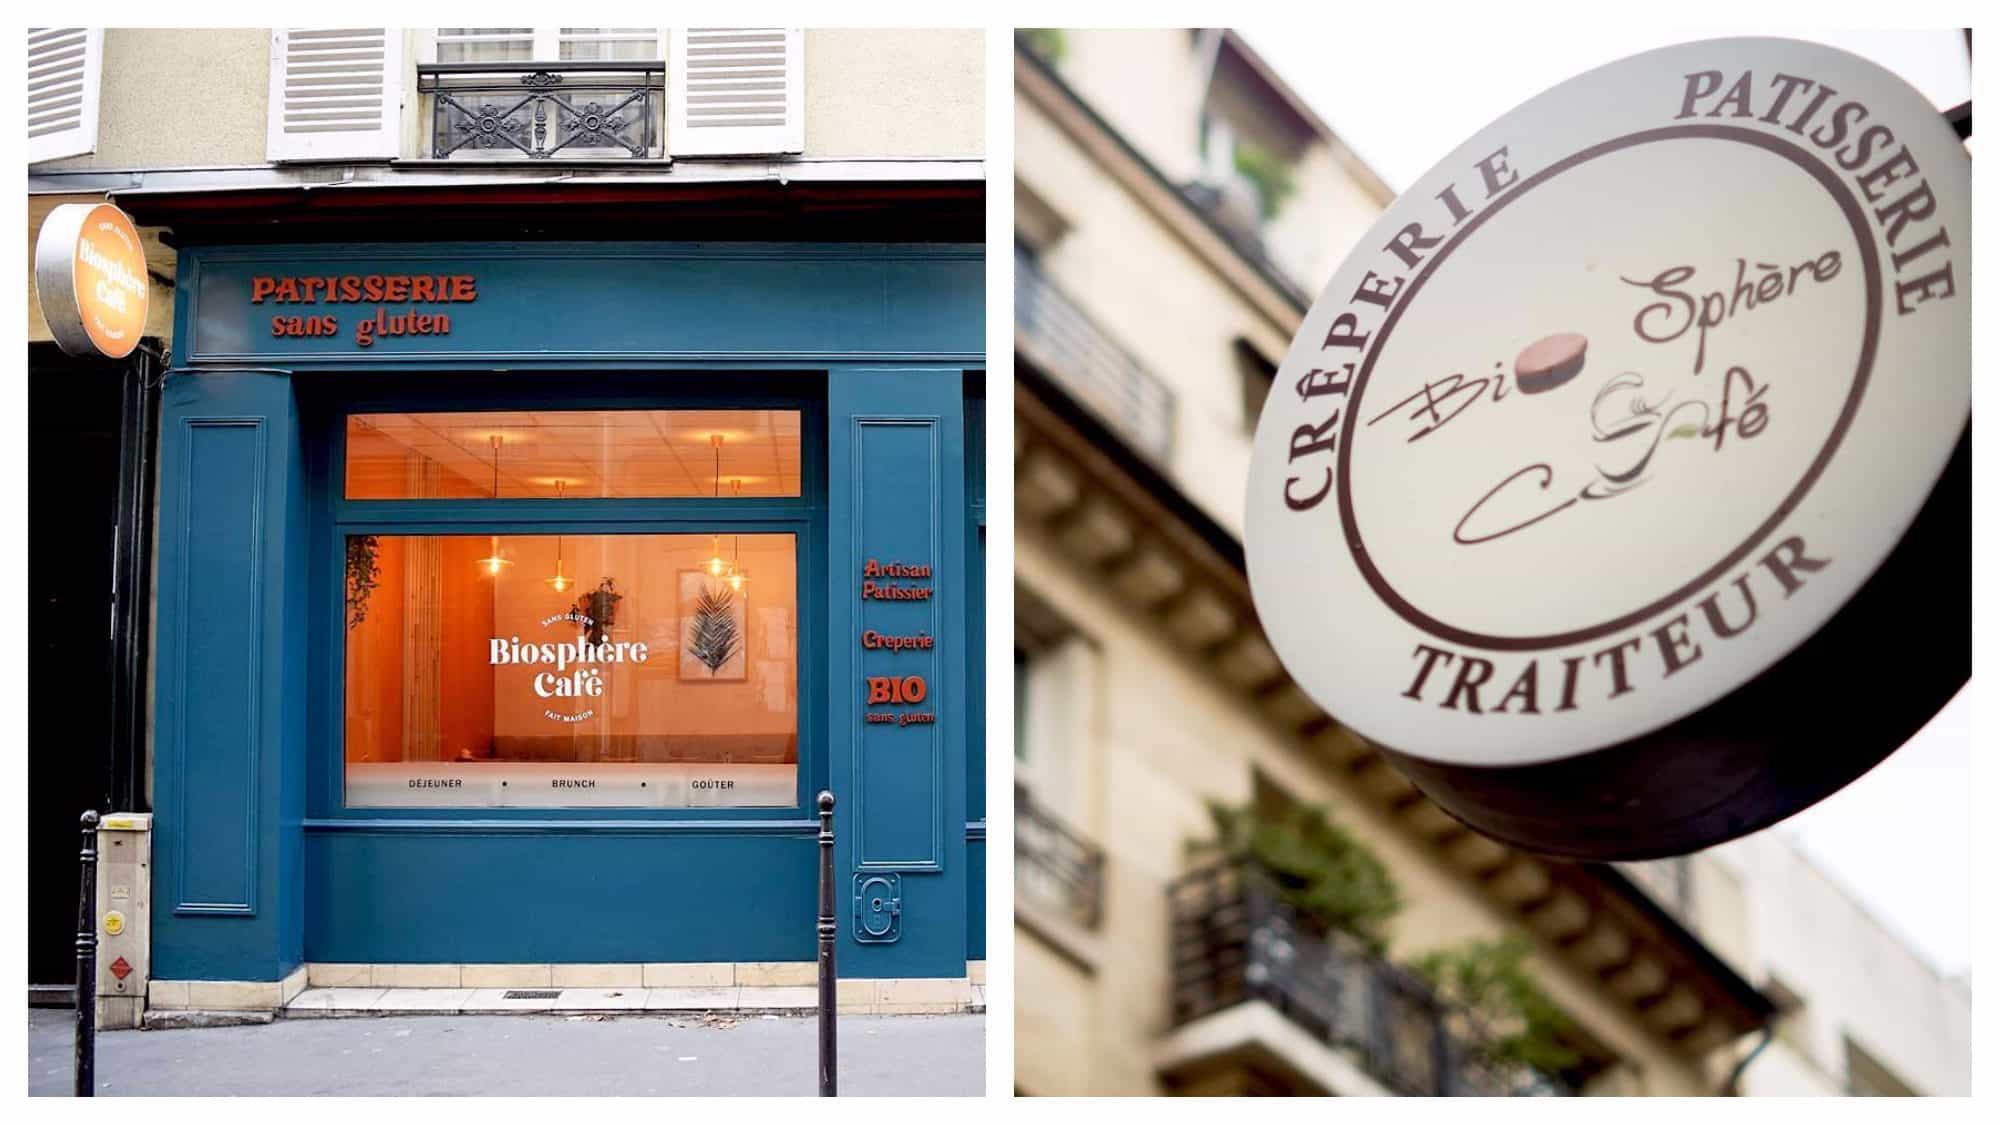 The blue exterior of the gluten-free patisserie in Paris, Biosphere (left) and the sign for gluten-free crepes also at Biosphere (right).